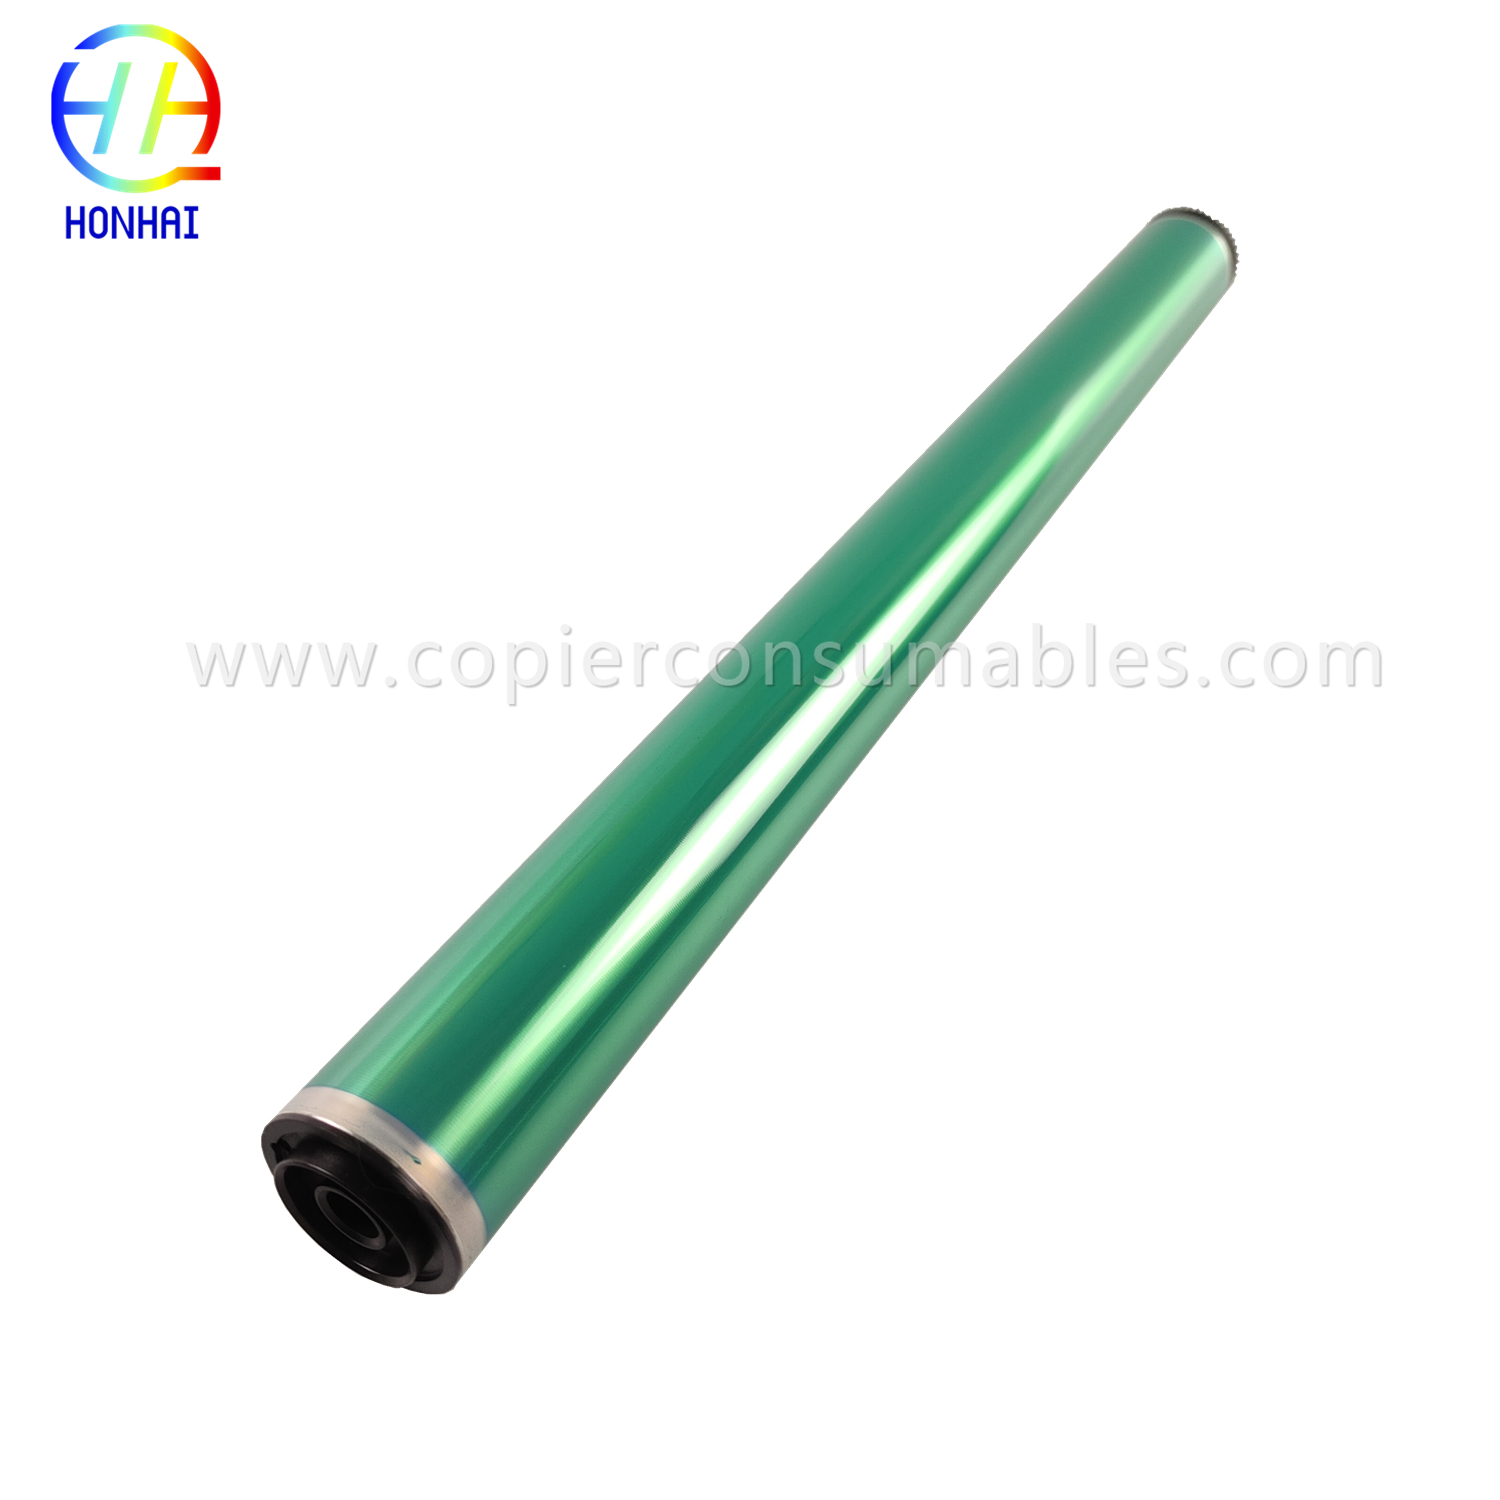 OPC Drum for HP CF257A 57A M436DN M433A M437 M439 & Samsung K2200 707  SL-K2200ND MLT-D707S R707  (2)